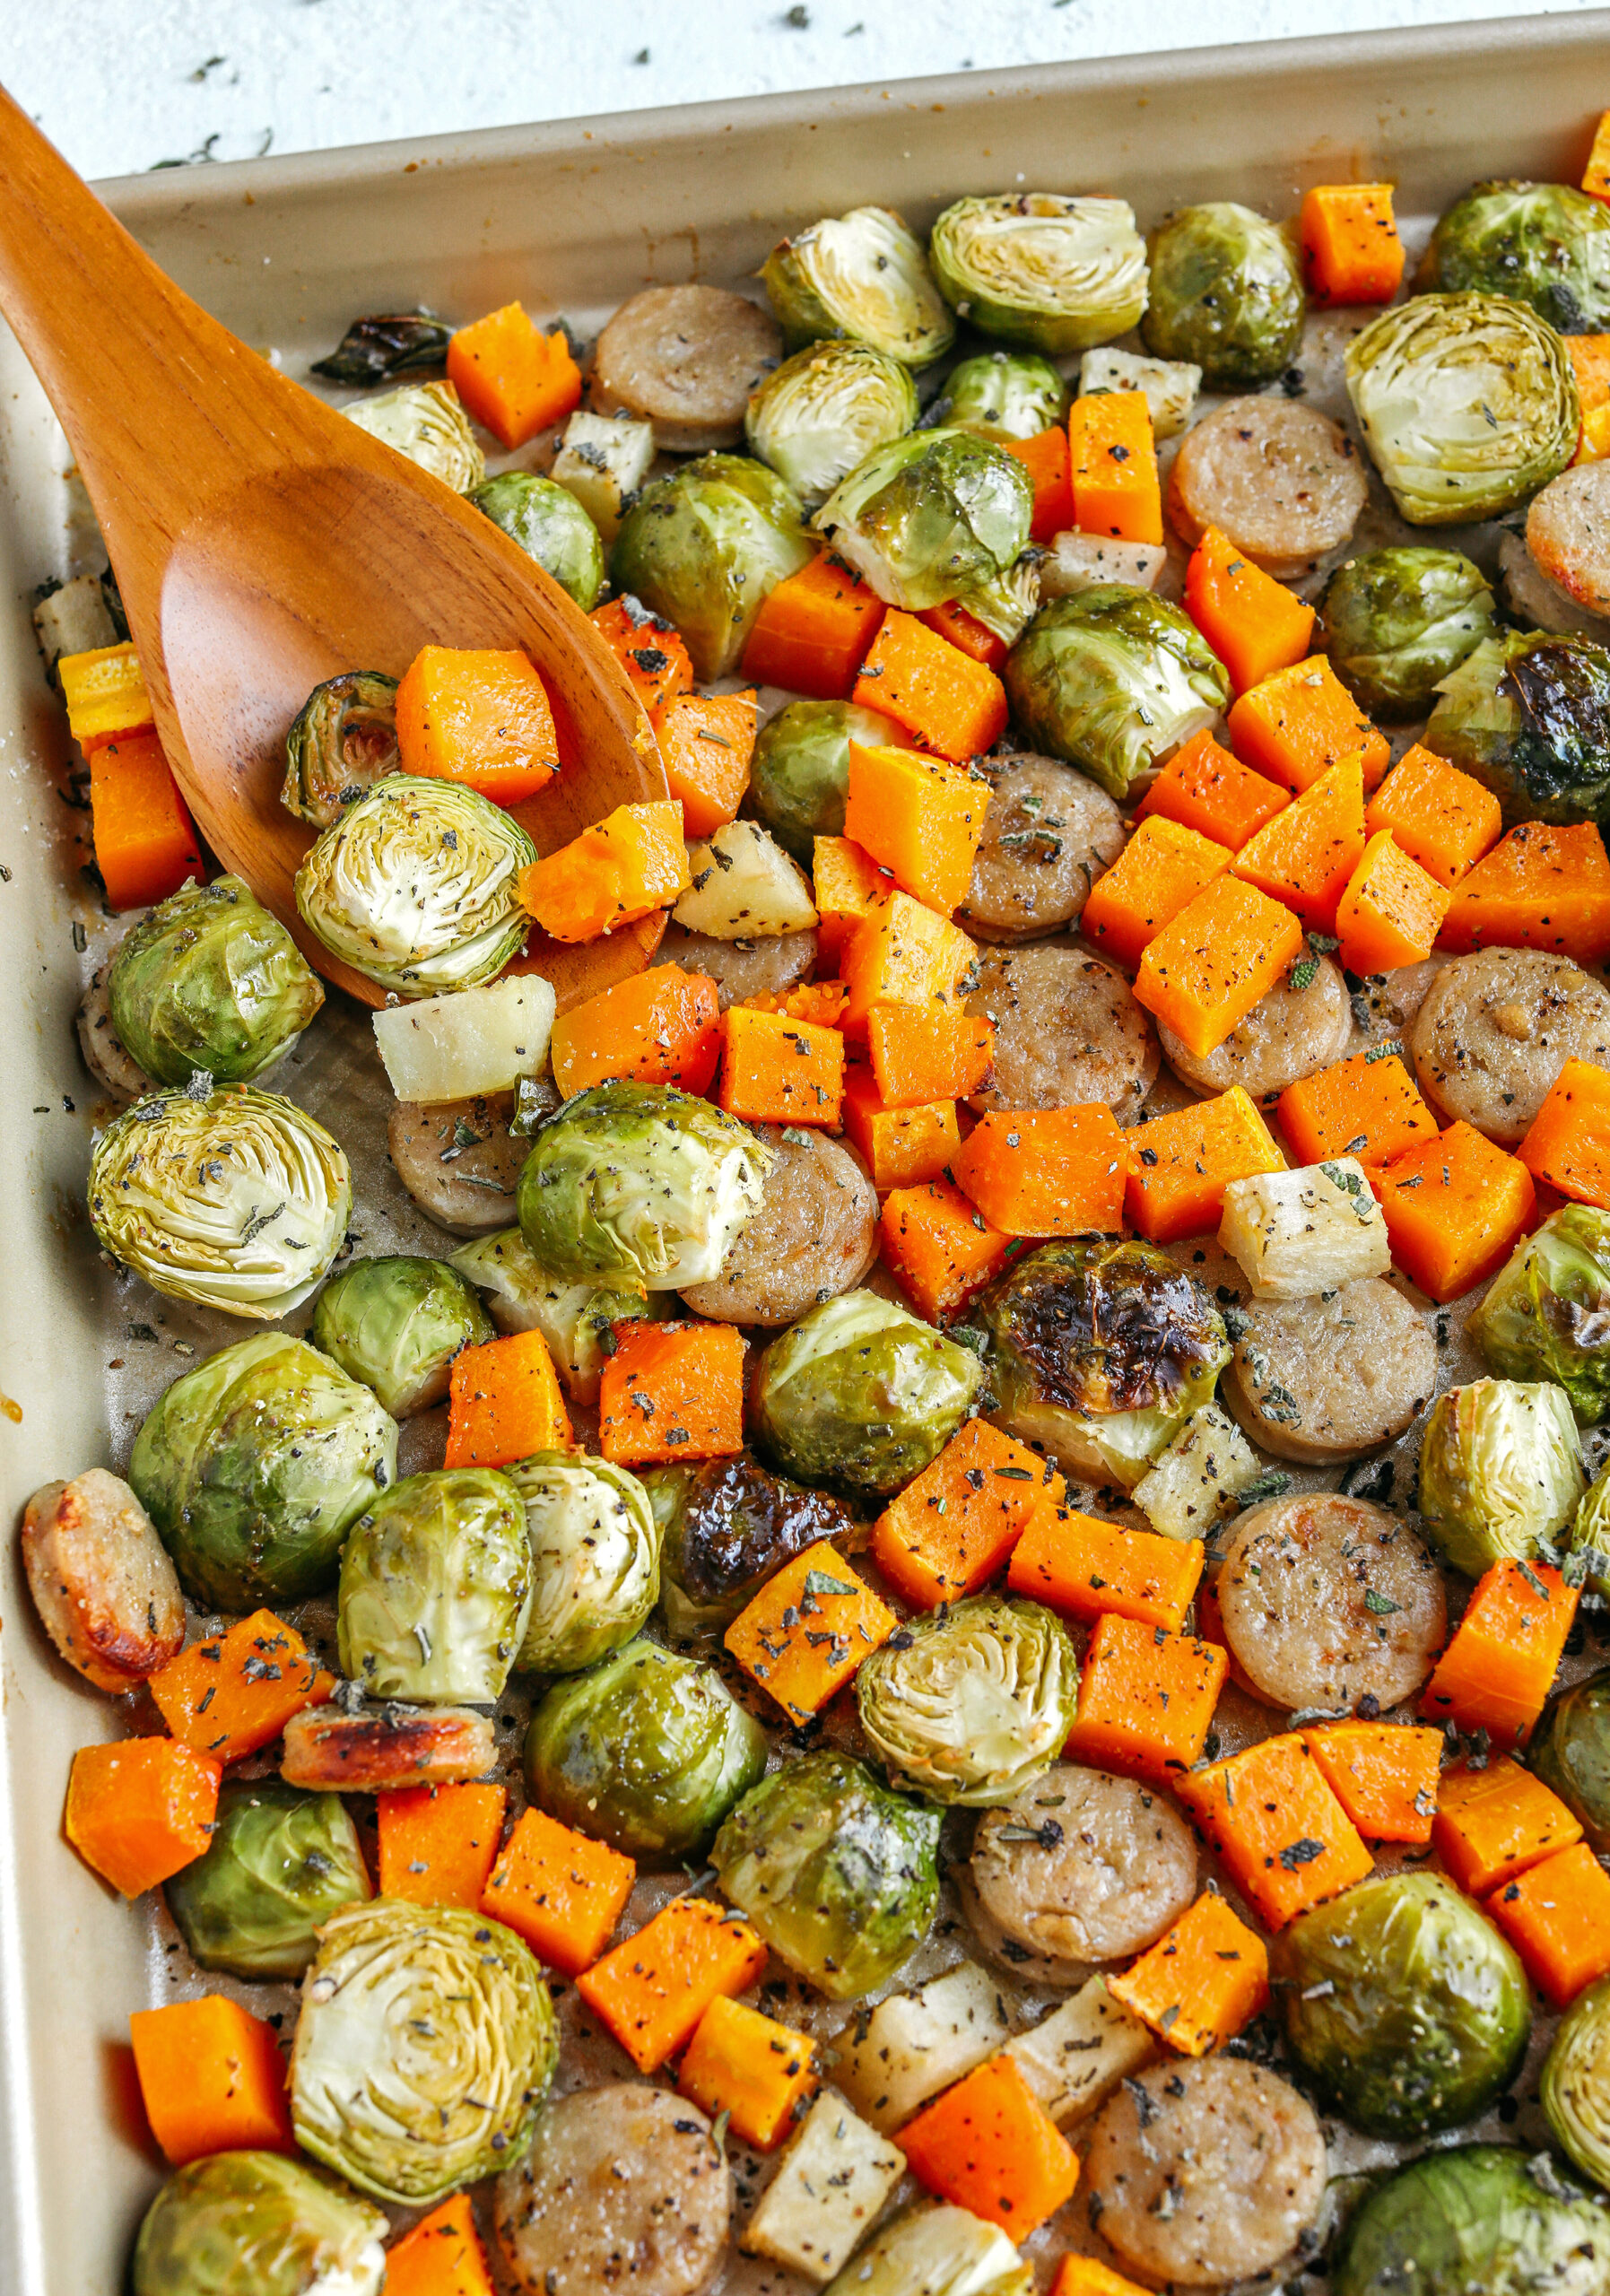 Harvest Sheet Pan Sausage and Veggies loaded with flavorful chicken sausage, butternut squash, brussels sprouts, and apples for a quick and easy dinner made in just 30 minutes!  Roasted in a maple mustard glaze and fresh herbs for the perfect fall meal!  